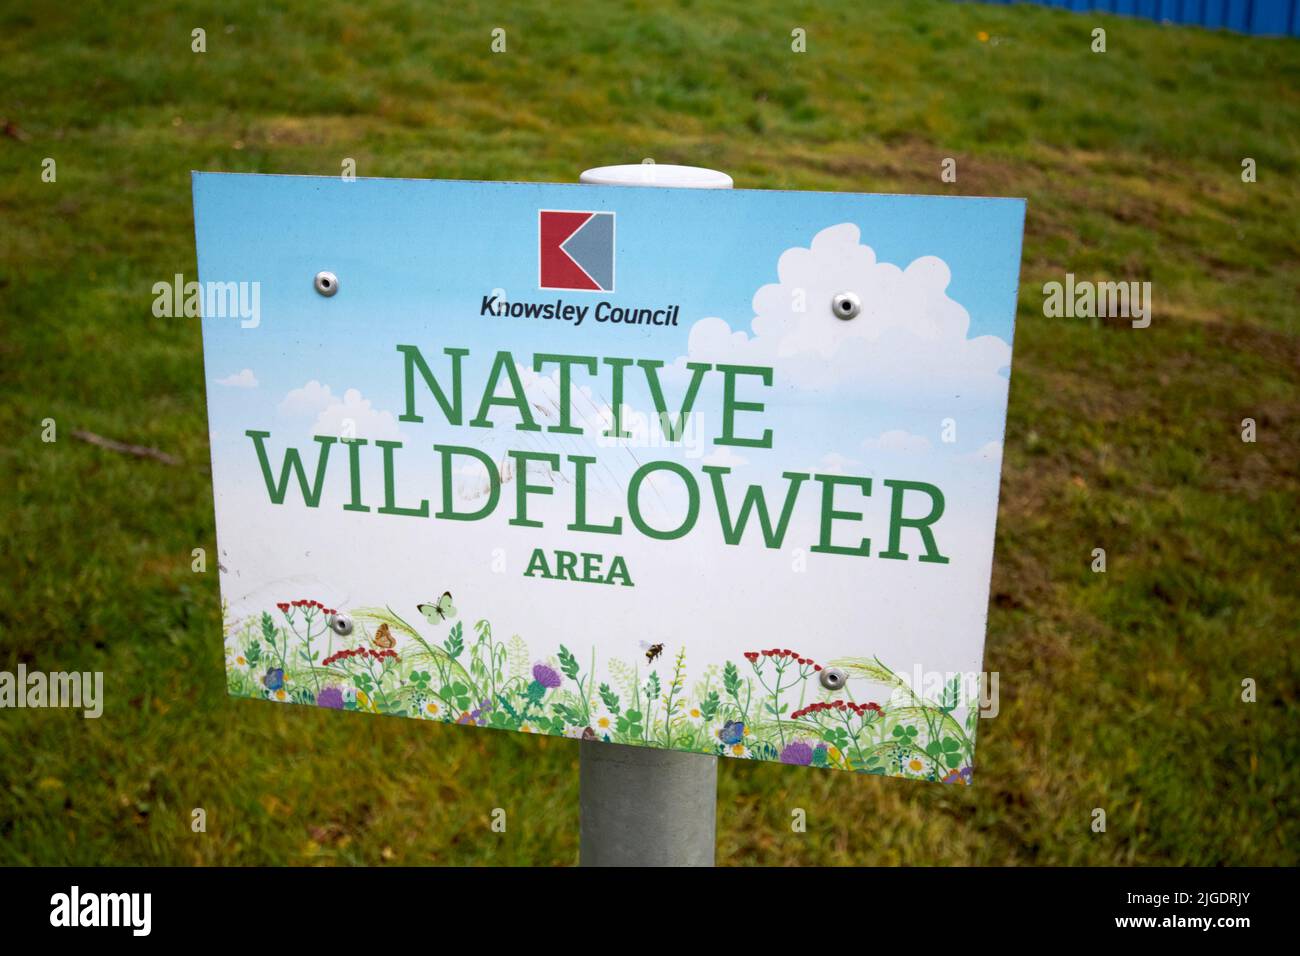 knowsley council reserved area of open public ground sewn with native wildflower seed as a protected area for bees and wildlife Stock Photo